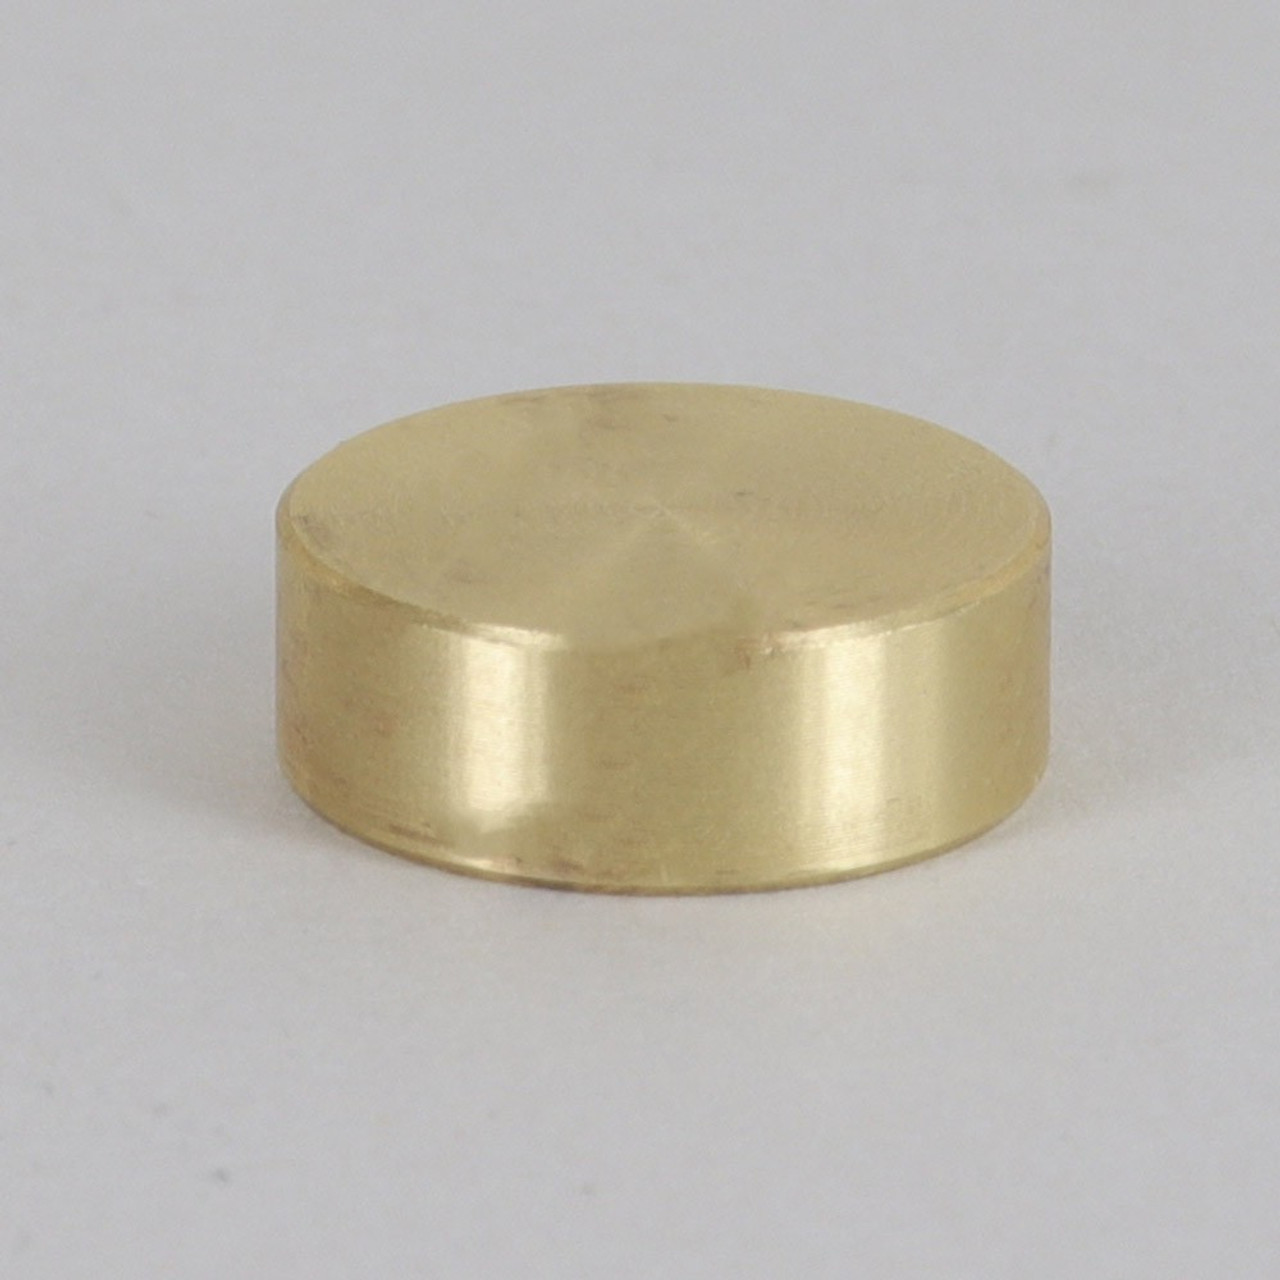 Nickel Plated Brass Snap Fasteners 3/16 Post on Cap & 1/4 Post